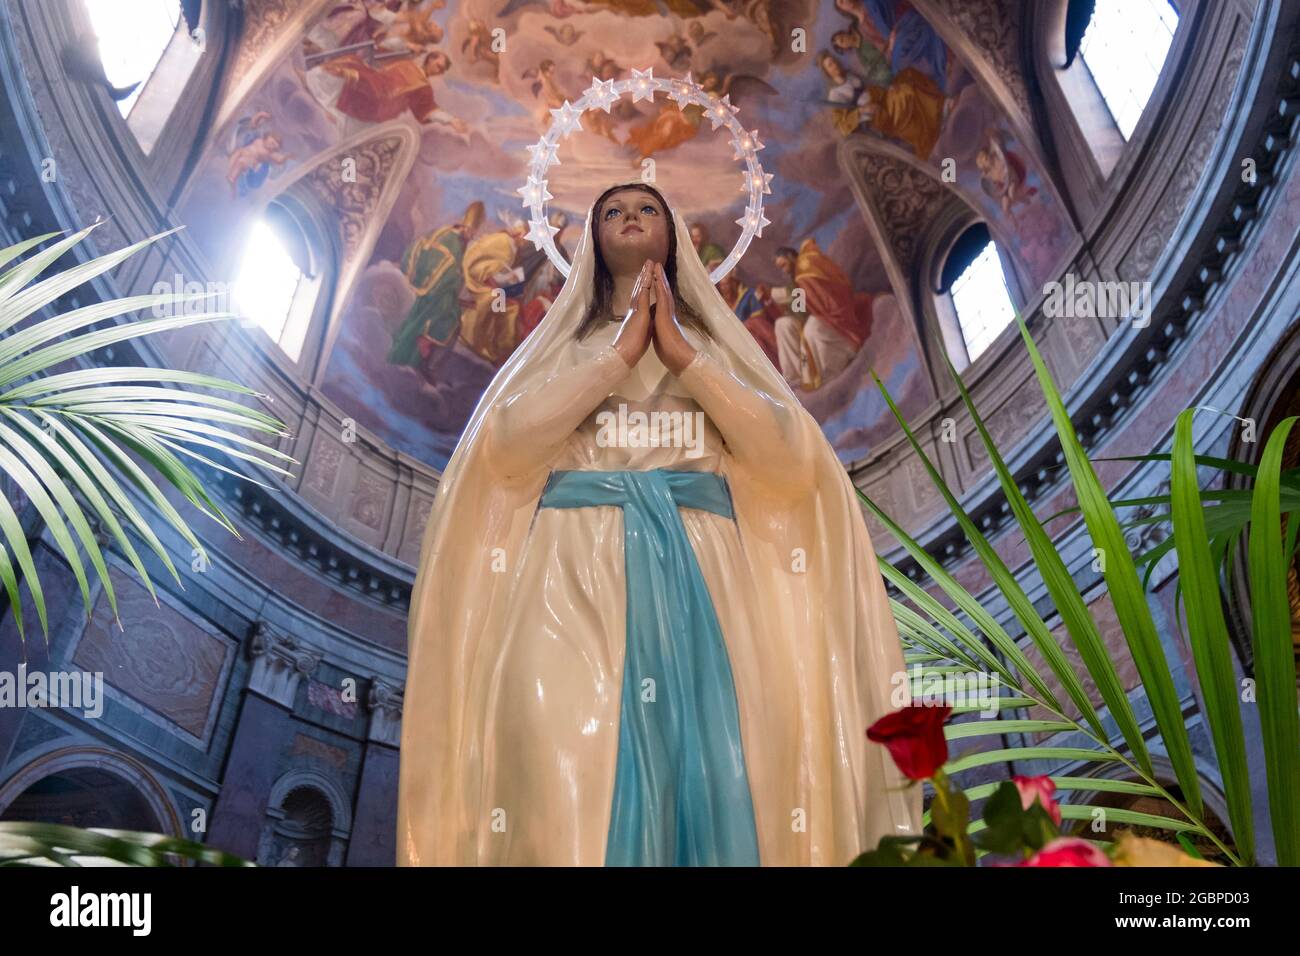 A sculpture, statue of the Virgin Mary, with white robe, blue sash and a lit halo. At a local church in Rome, Italy. Stock Photo